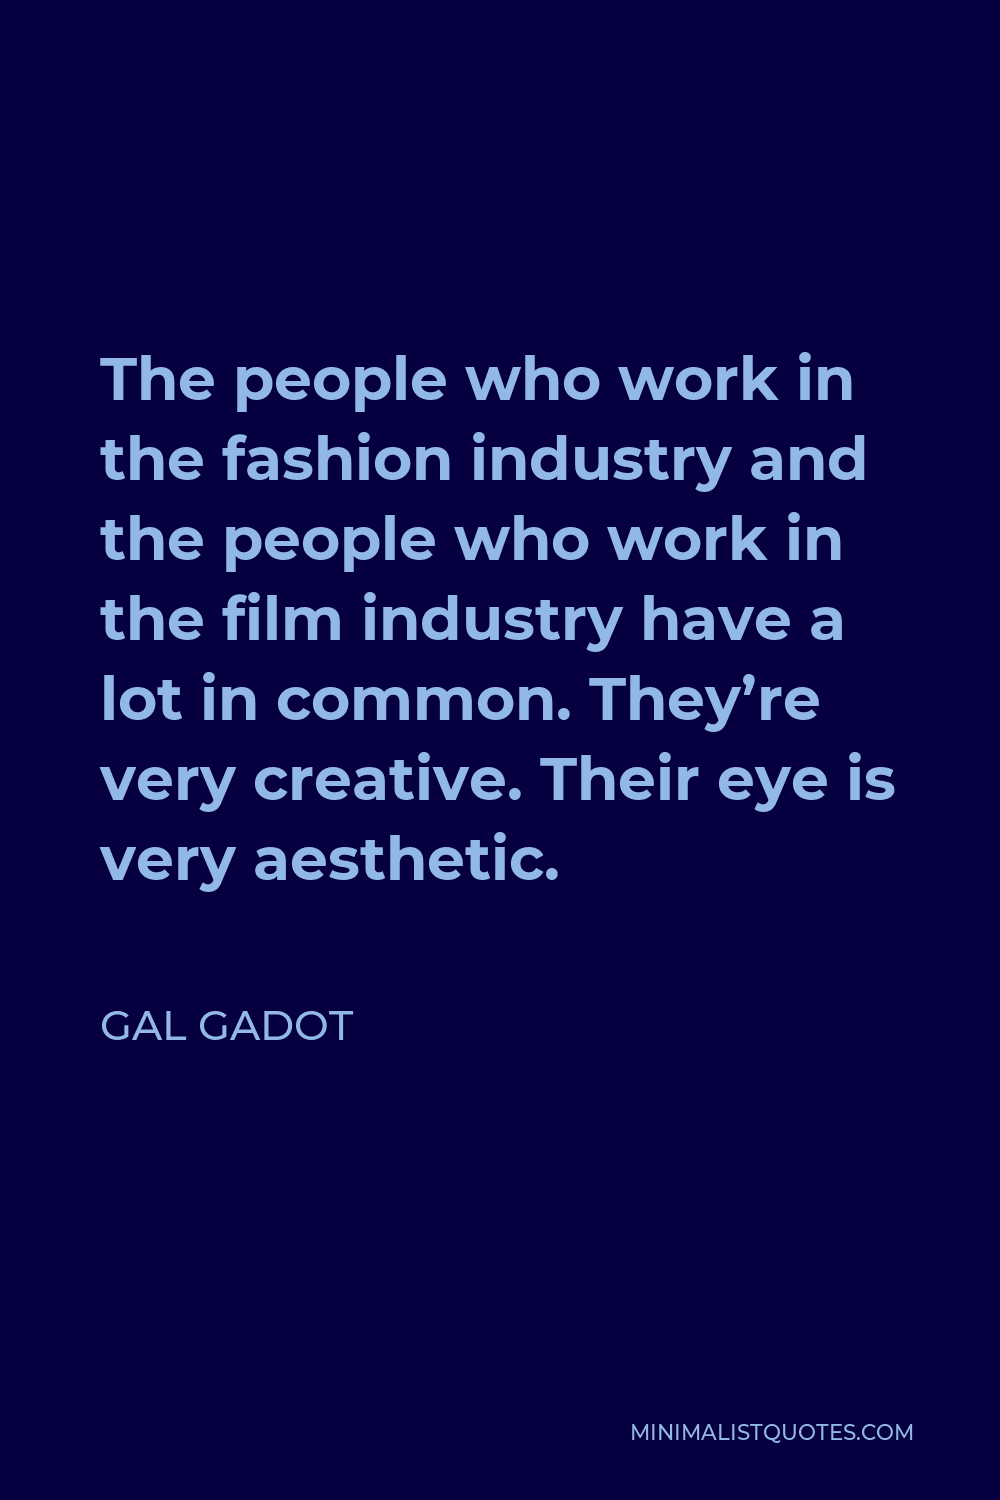 Gal Gadot Quote - The people who work in the fashion industry and the people who work in the film industry have a lot in common. They’re very creative. Their eye is very aesthetic.